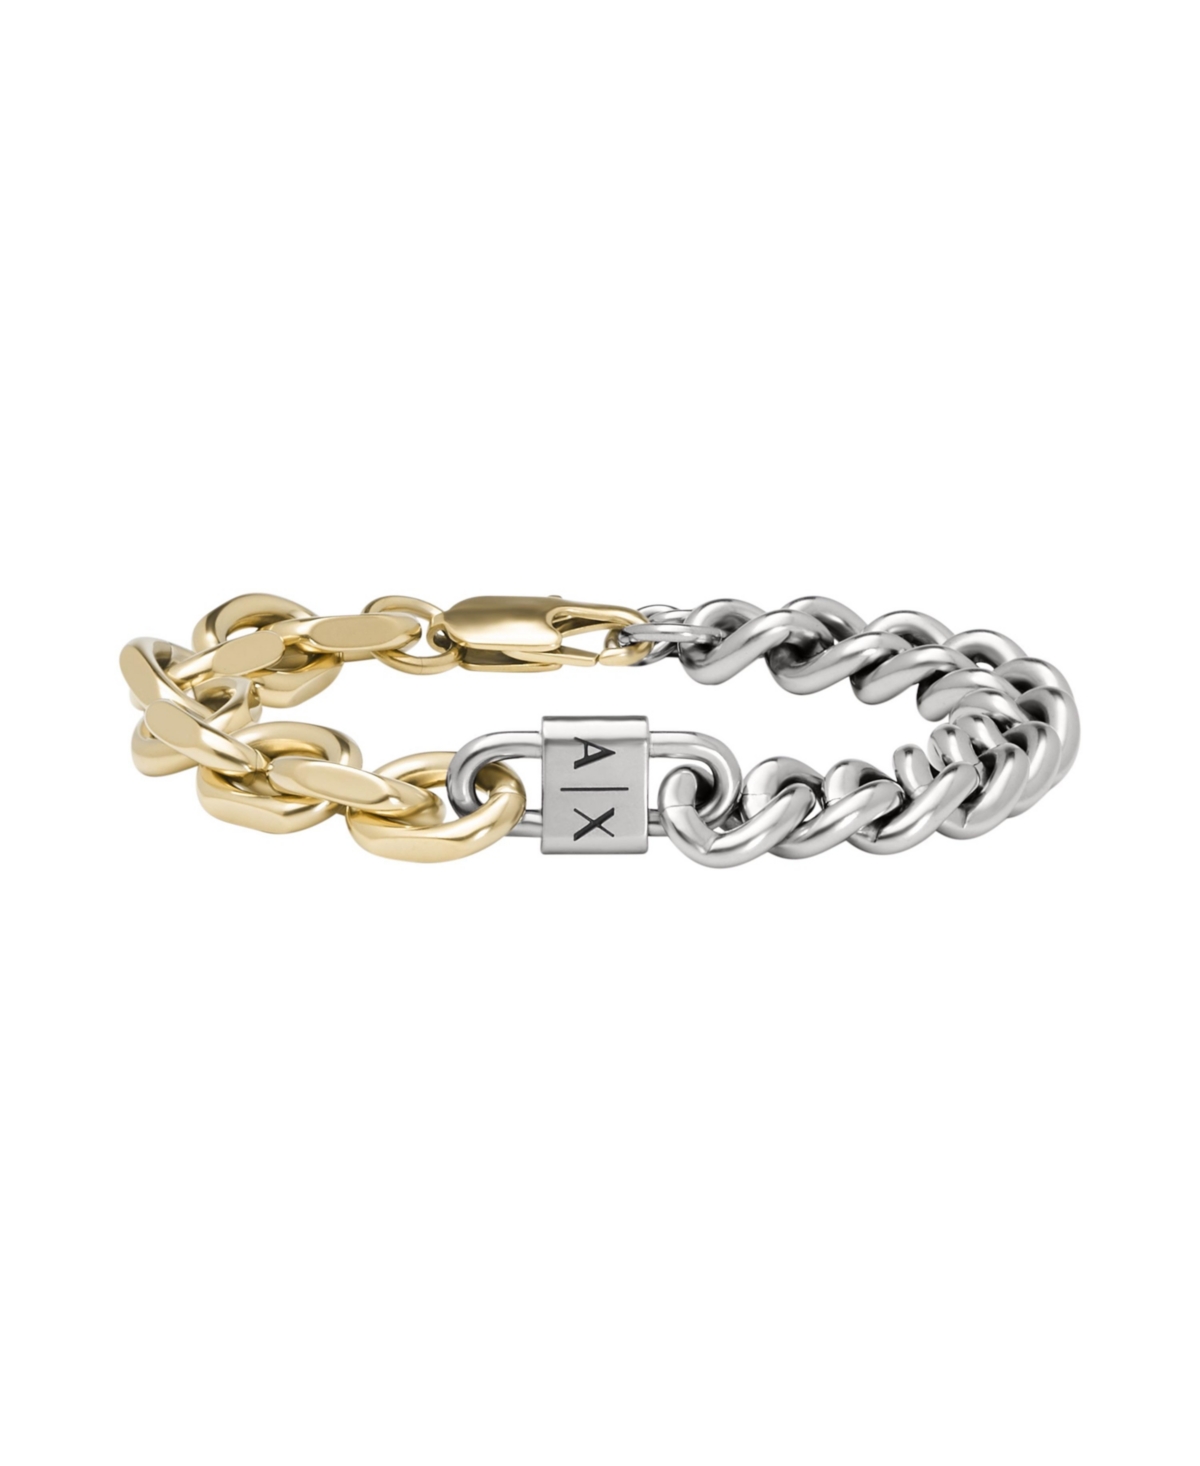 Men's Two-Tone Stainless Steel Chain Bracelet - French rose